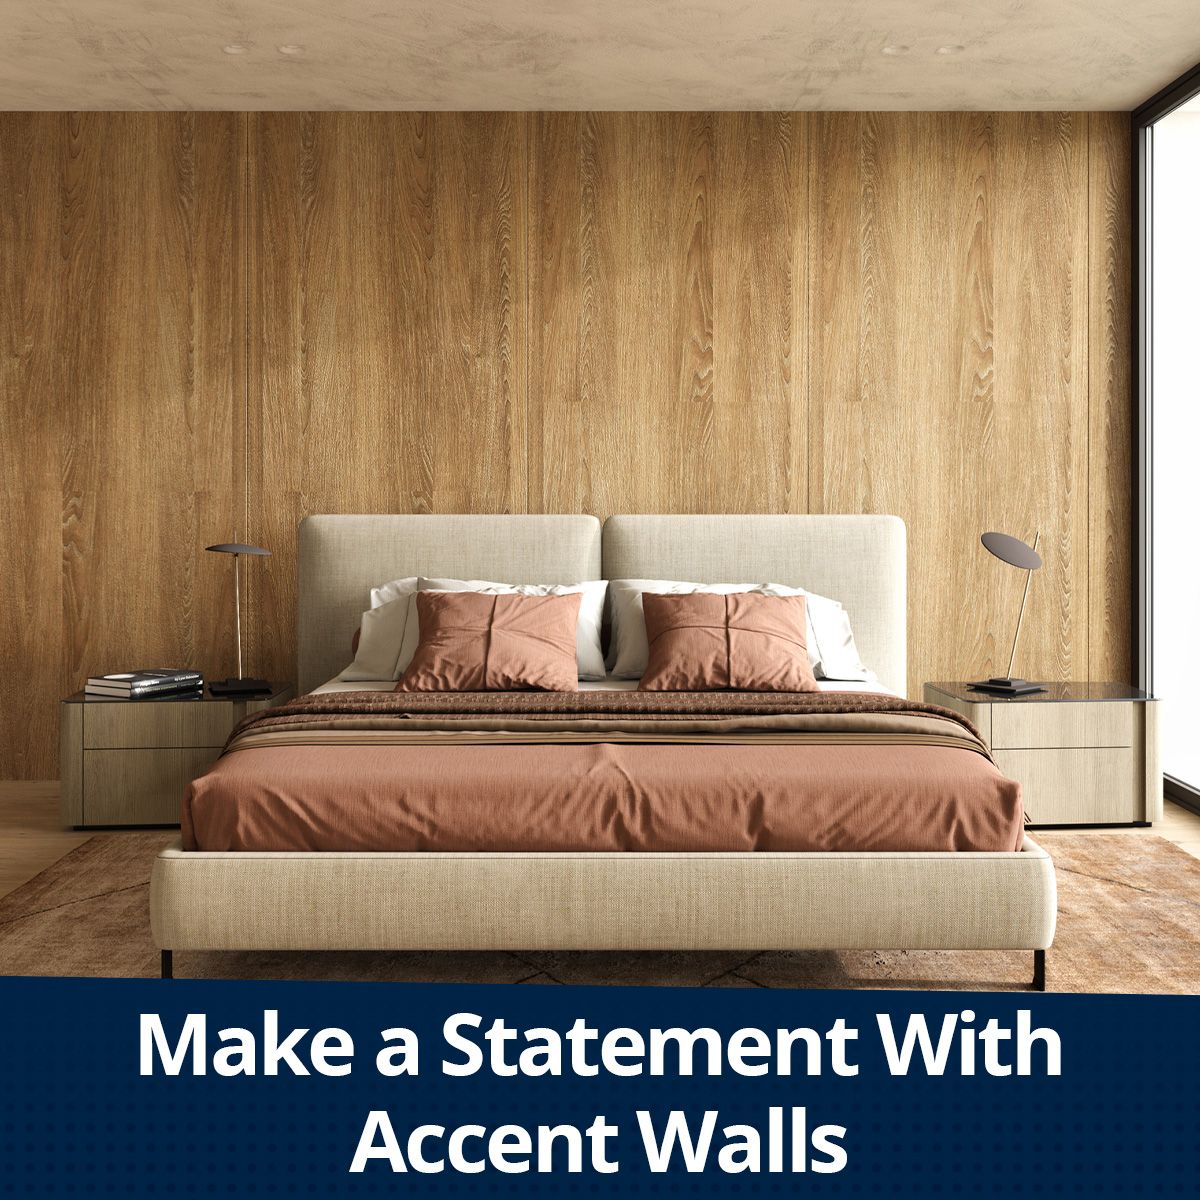 Make a Statement With Accent Walls